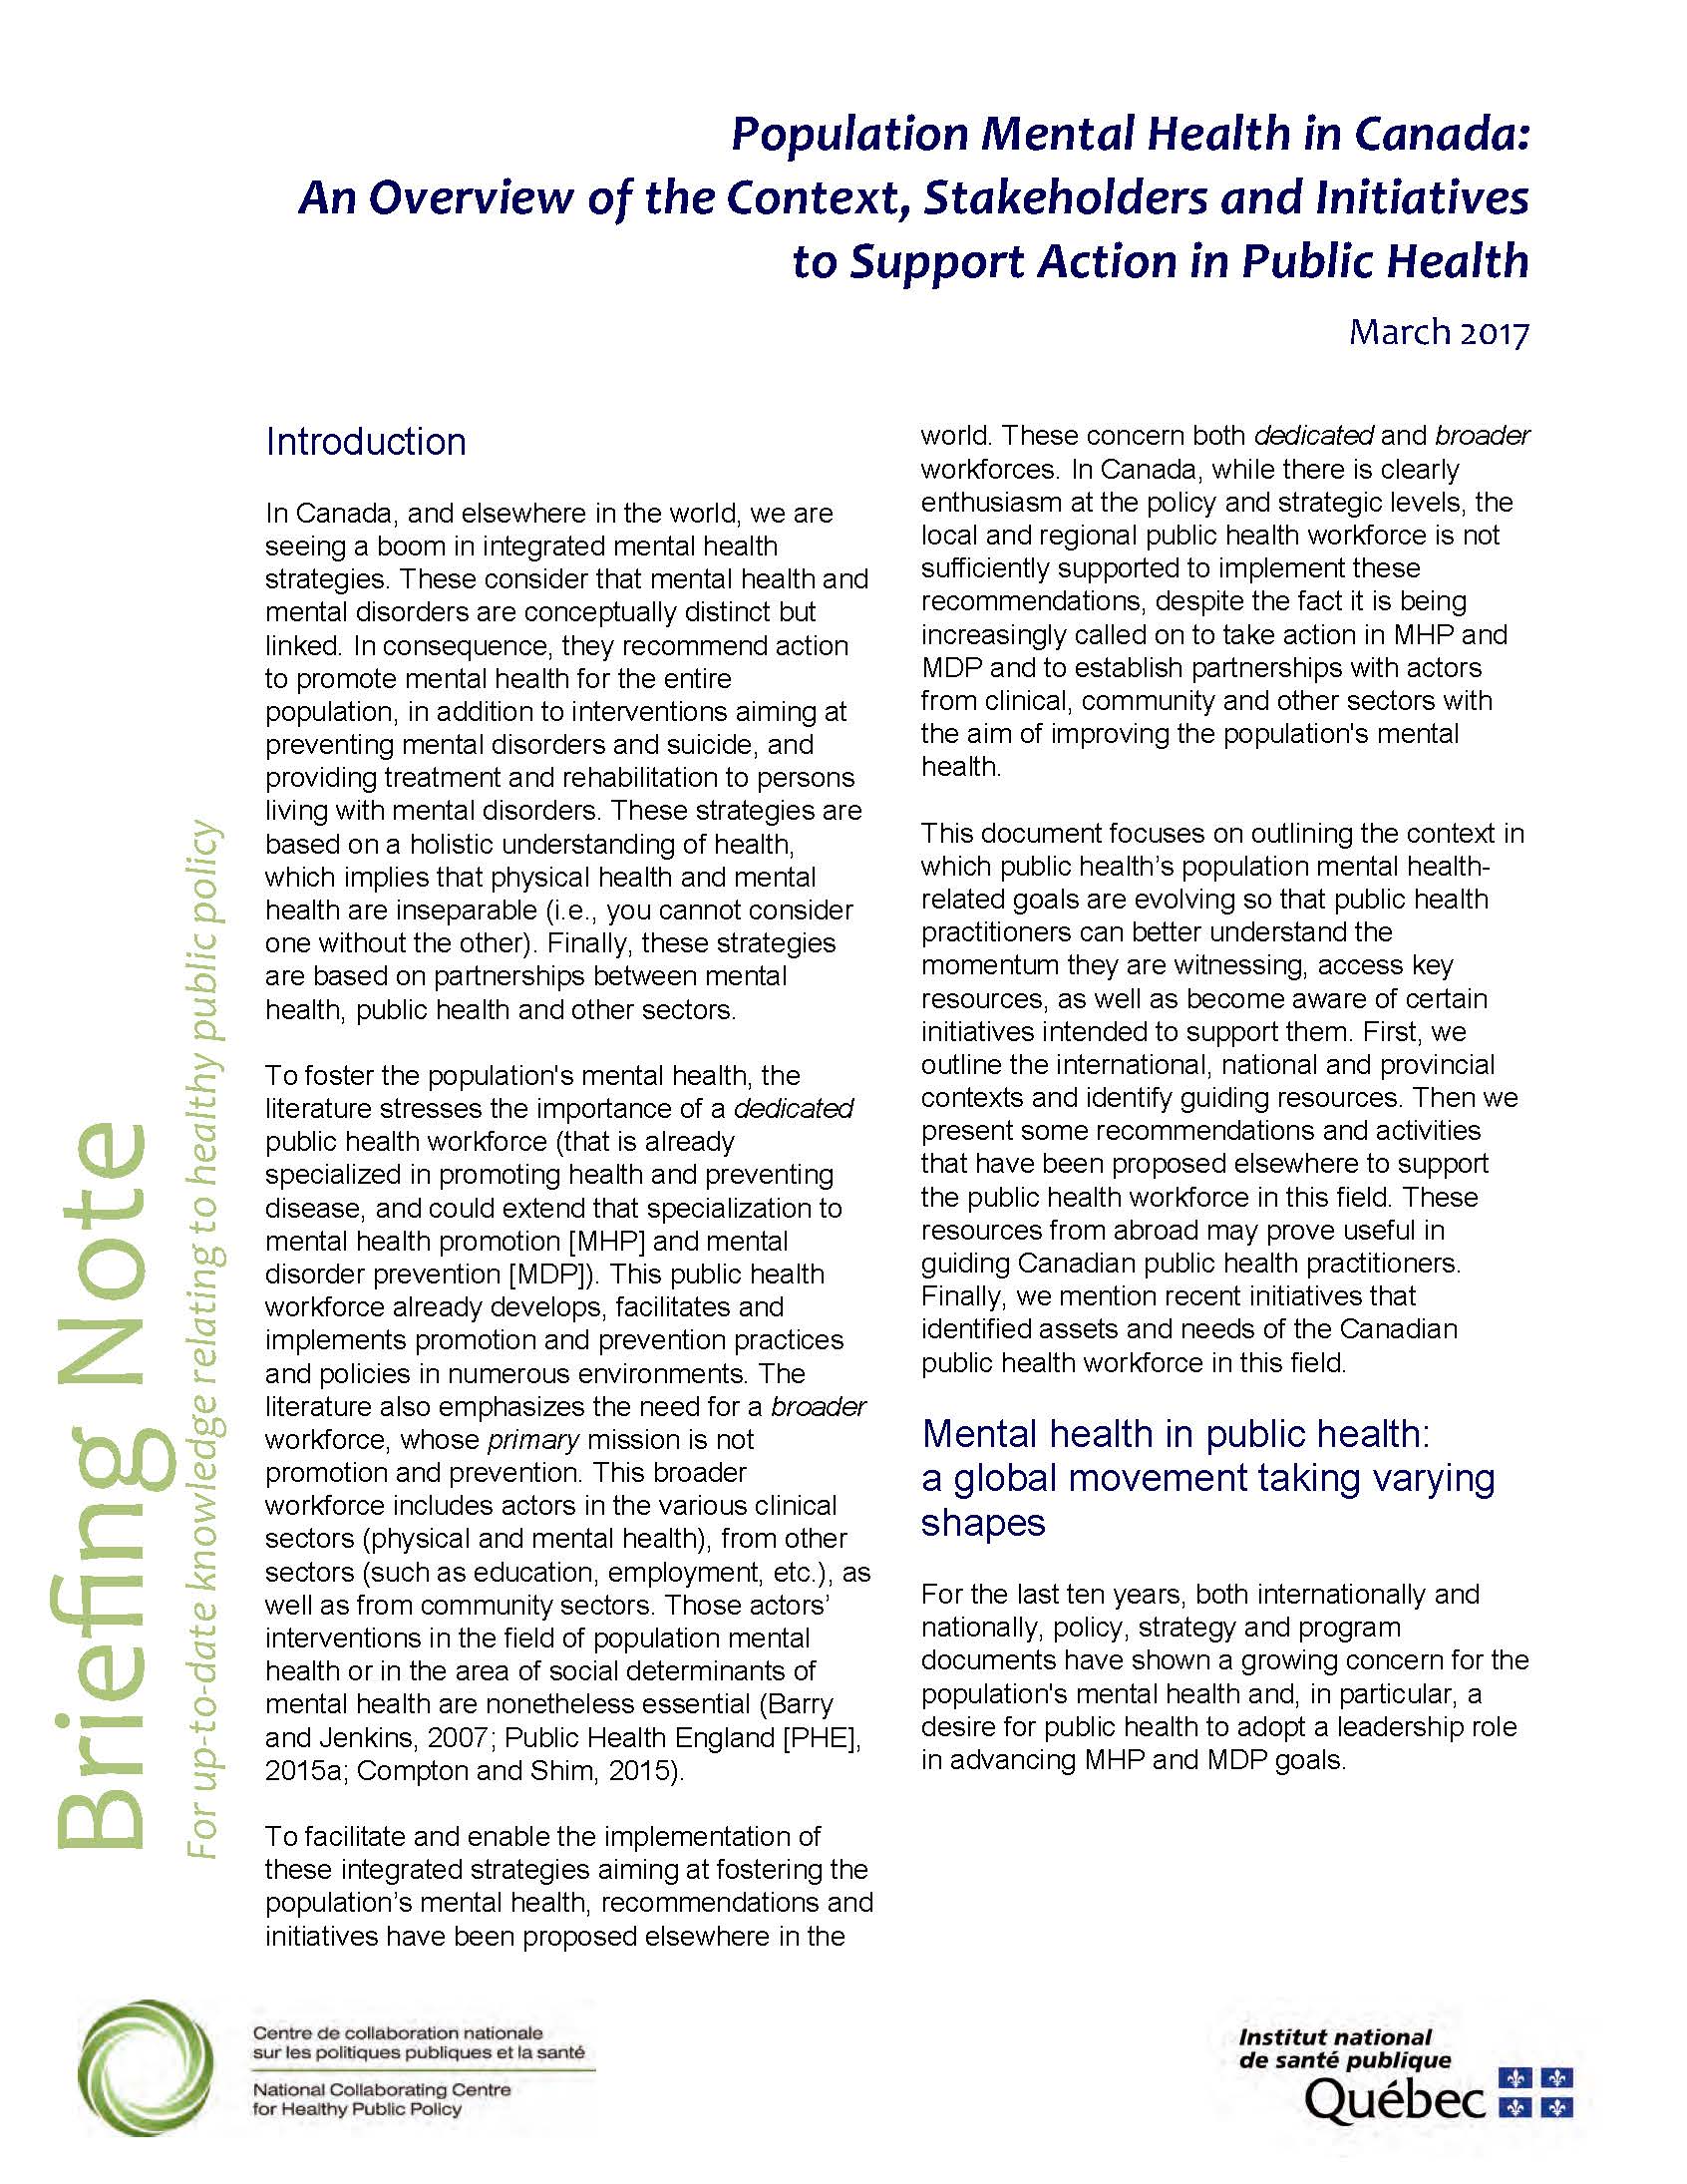 Population Mental Health in Canada: An Overview of the Context, Stakeholders and Initiatives to Support Action in Public Health